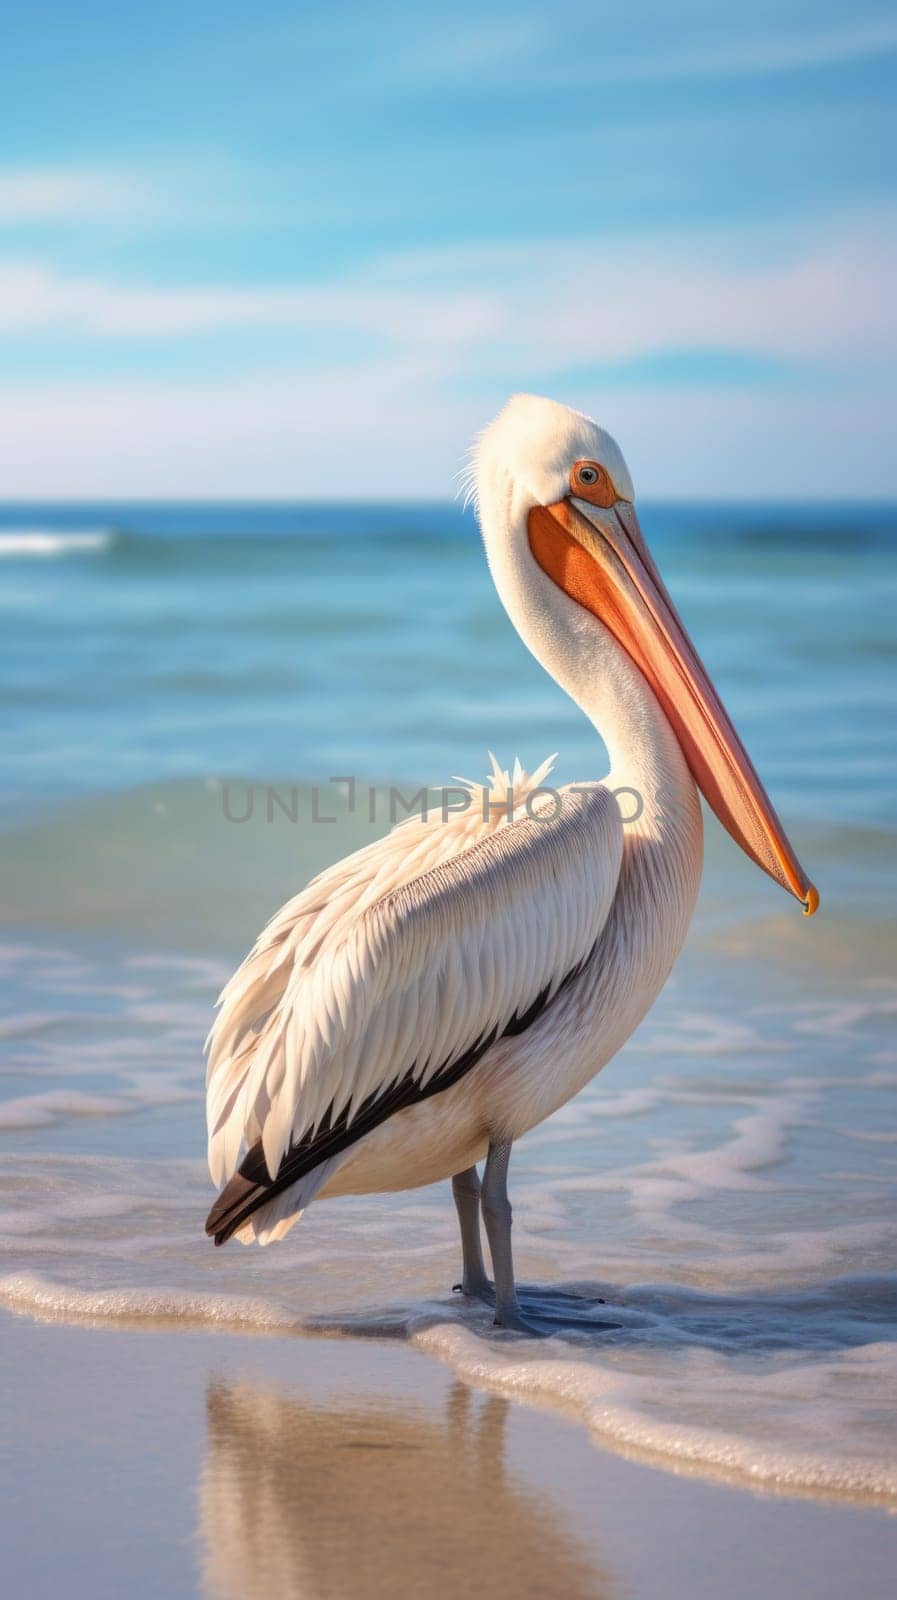 A pelican standing on the beach with its beak open, AI by starush